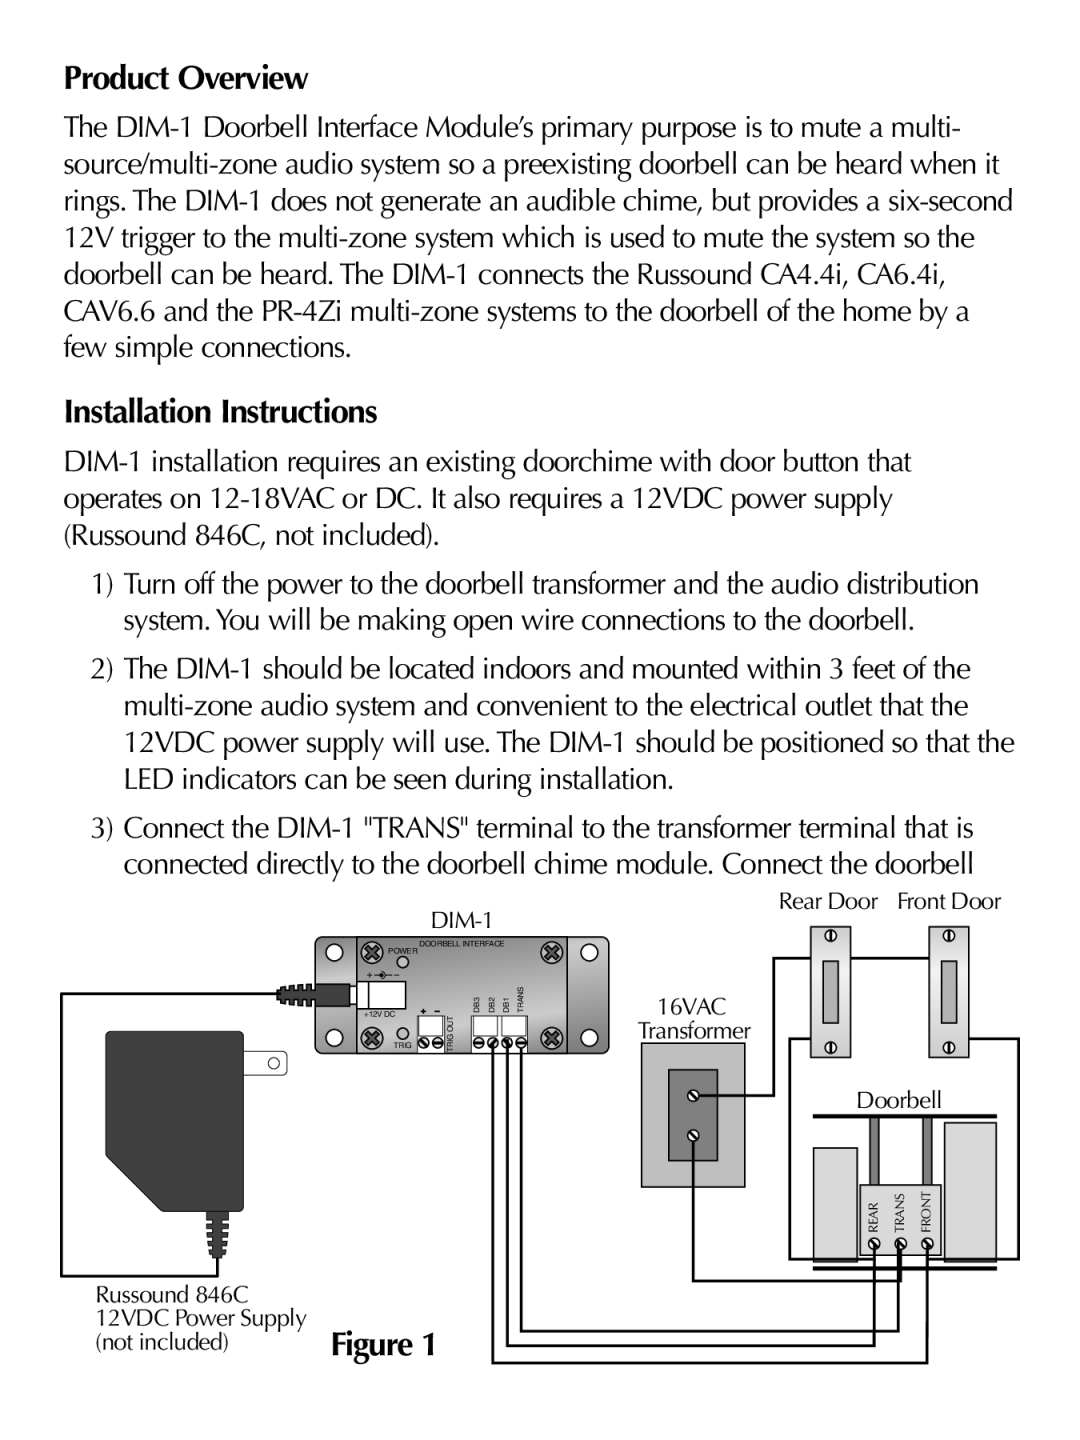 Russound DIM-1 instruction manual Product Overview, Installation Instructions 